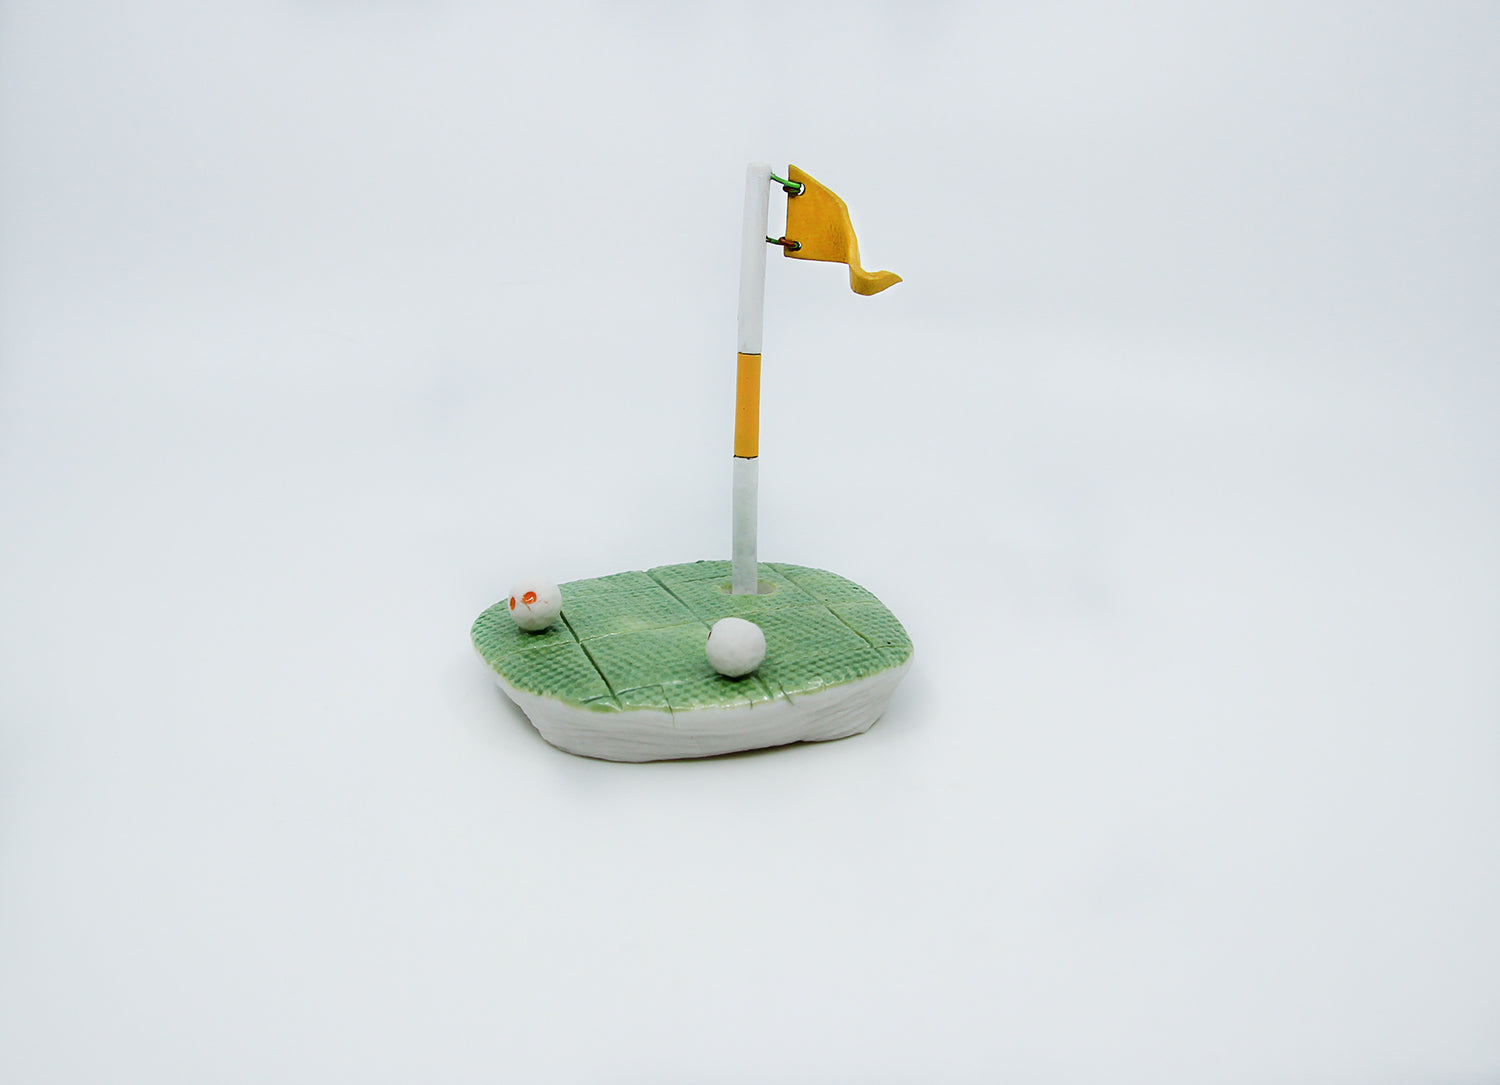 Clay golf green with yellow flag and two golf balls 